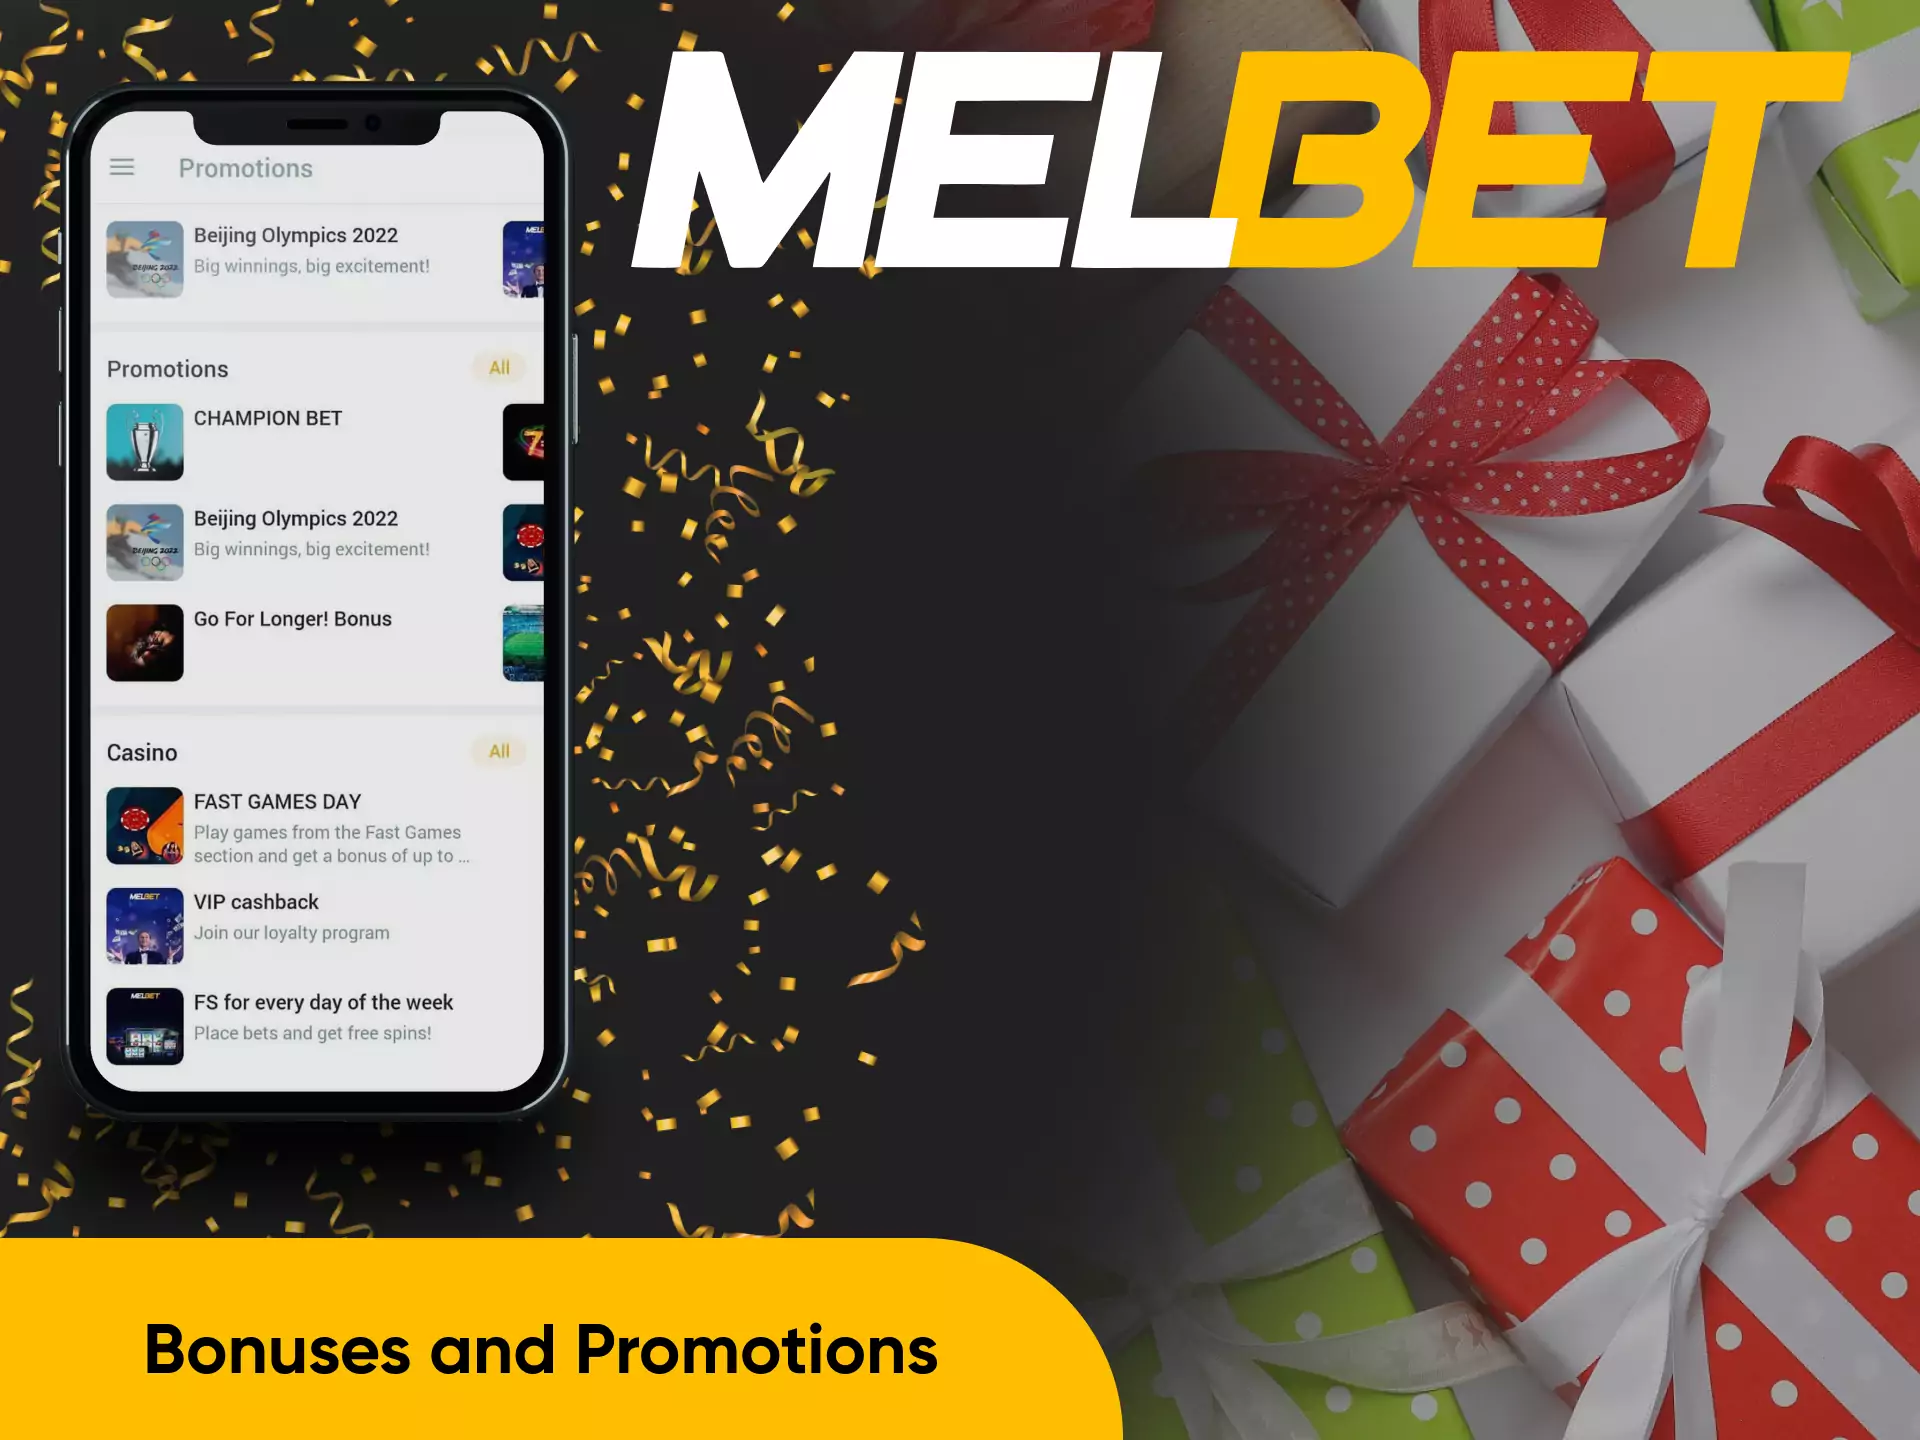 There is a special section with bonuses and promotions in the Melbet app.